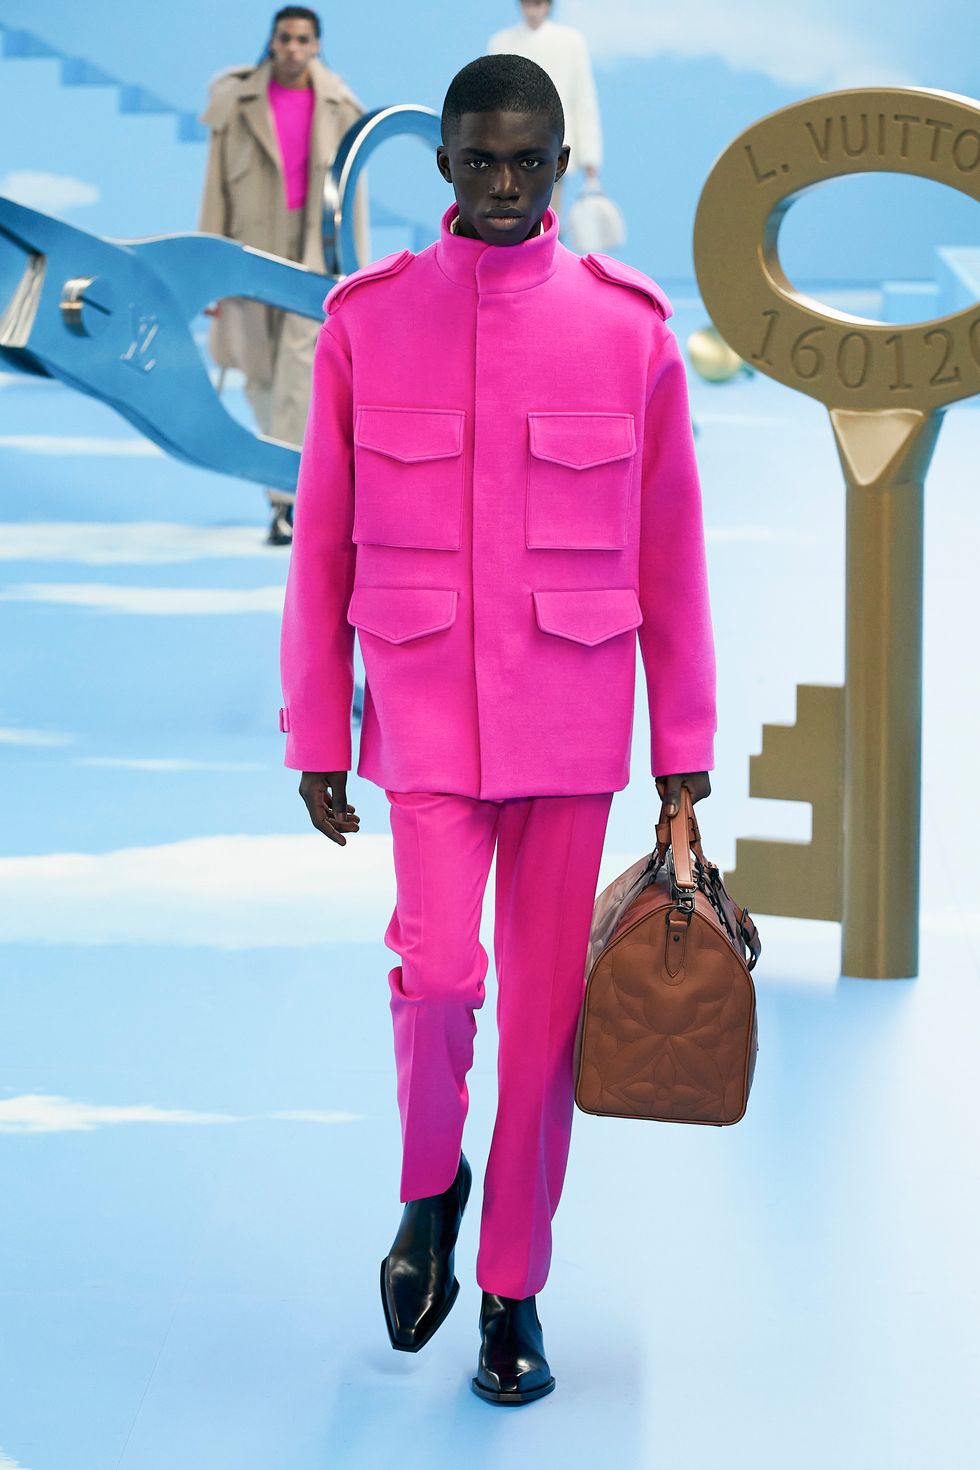 Virgil Abloh Made Playful Suits for Louis Vuitton Fall 2020 - PAPER Magazine